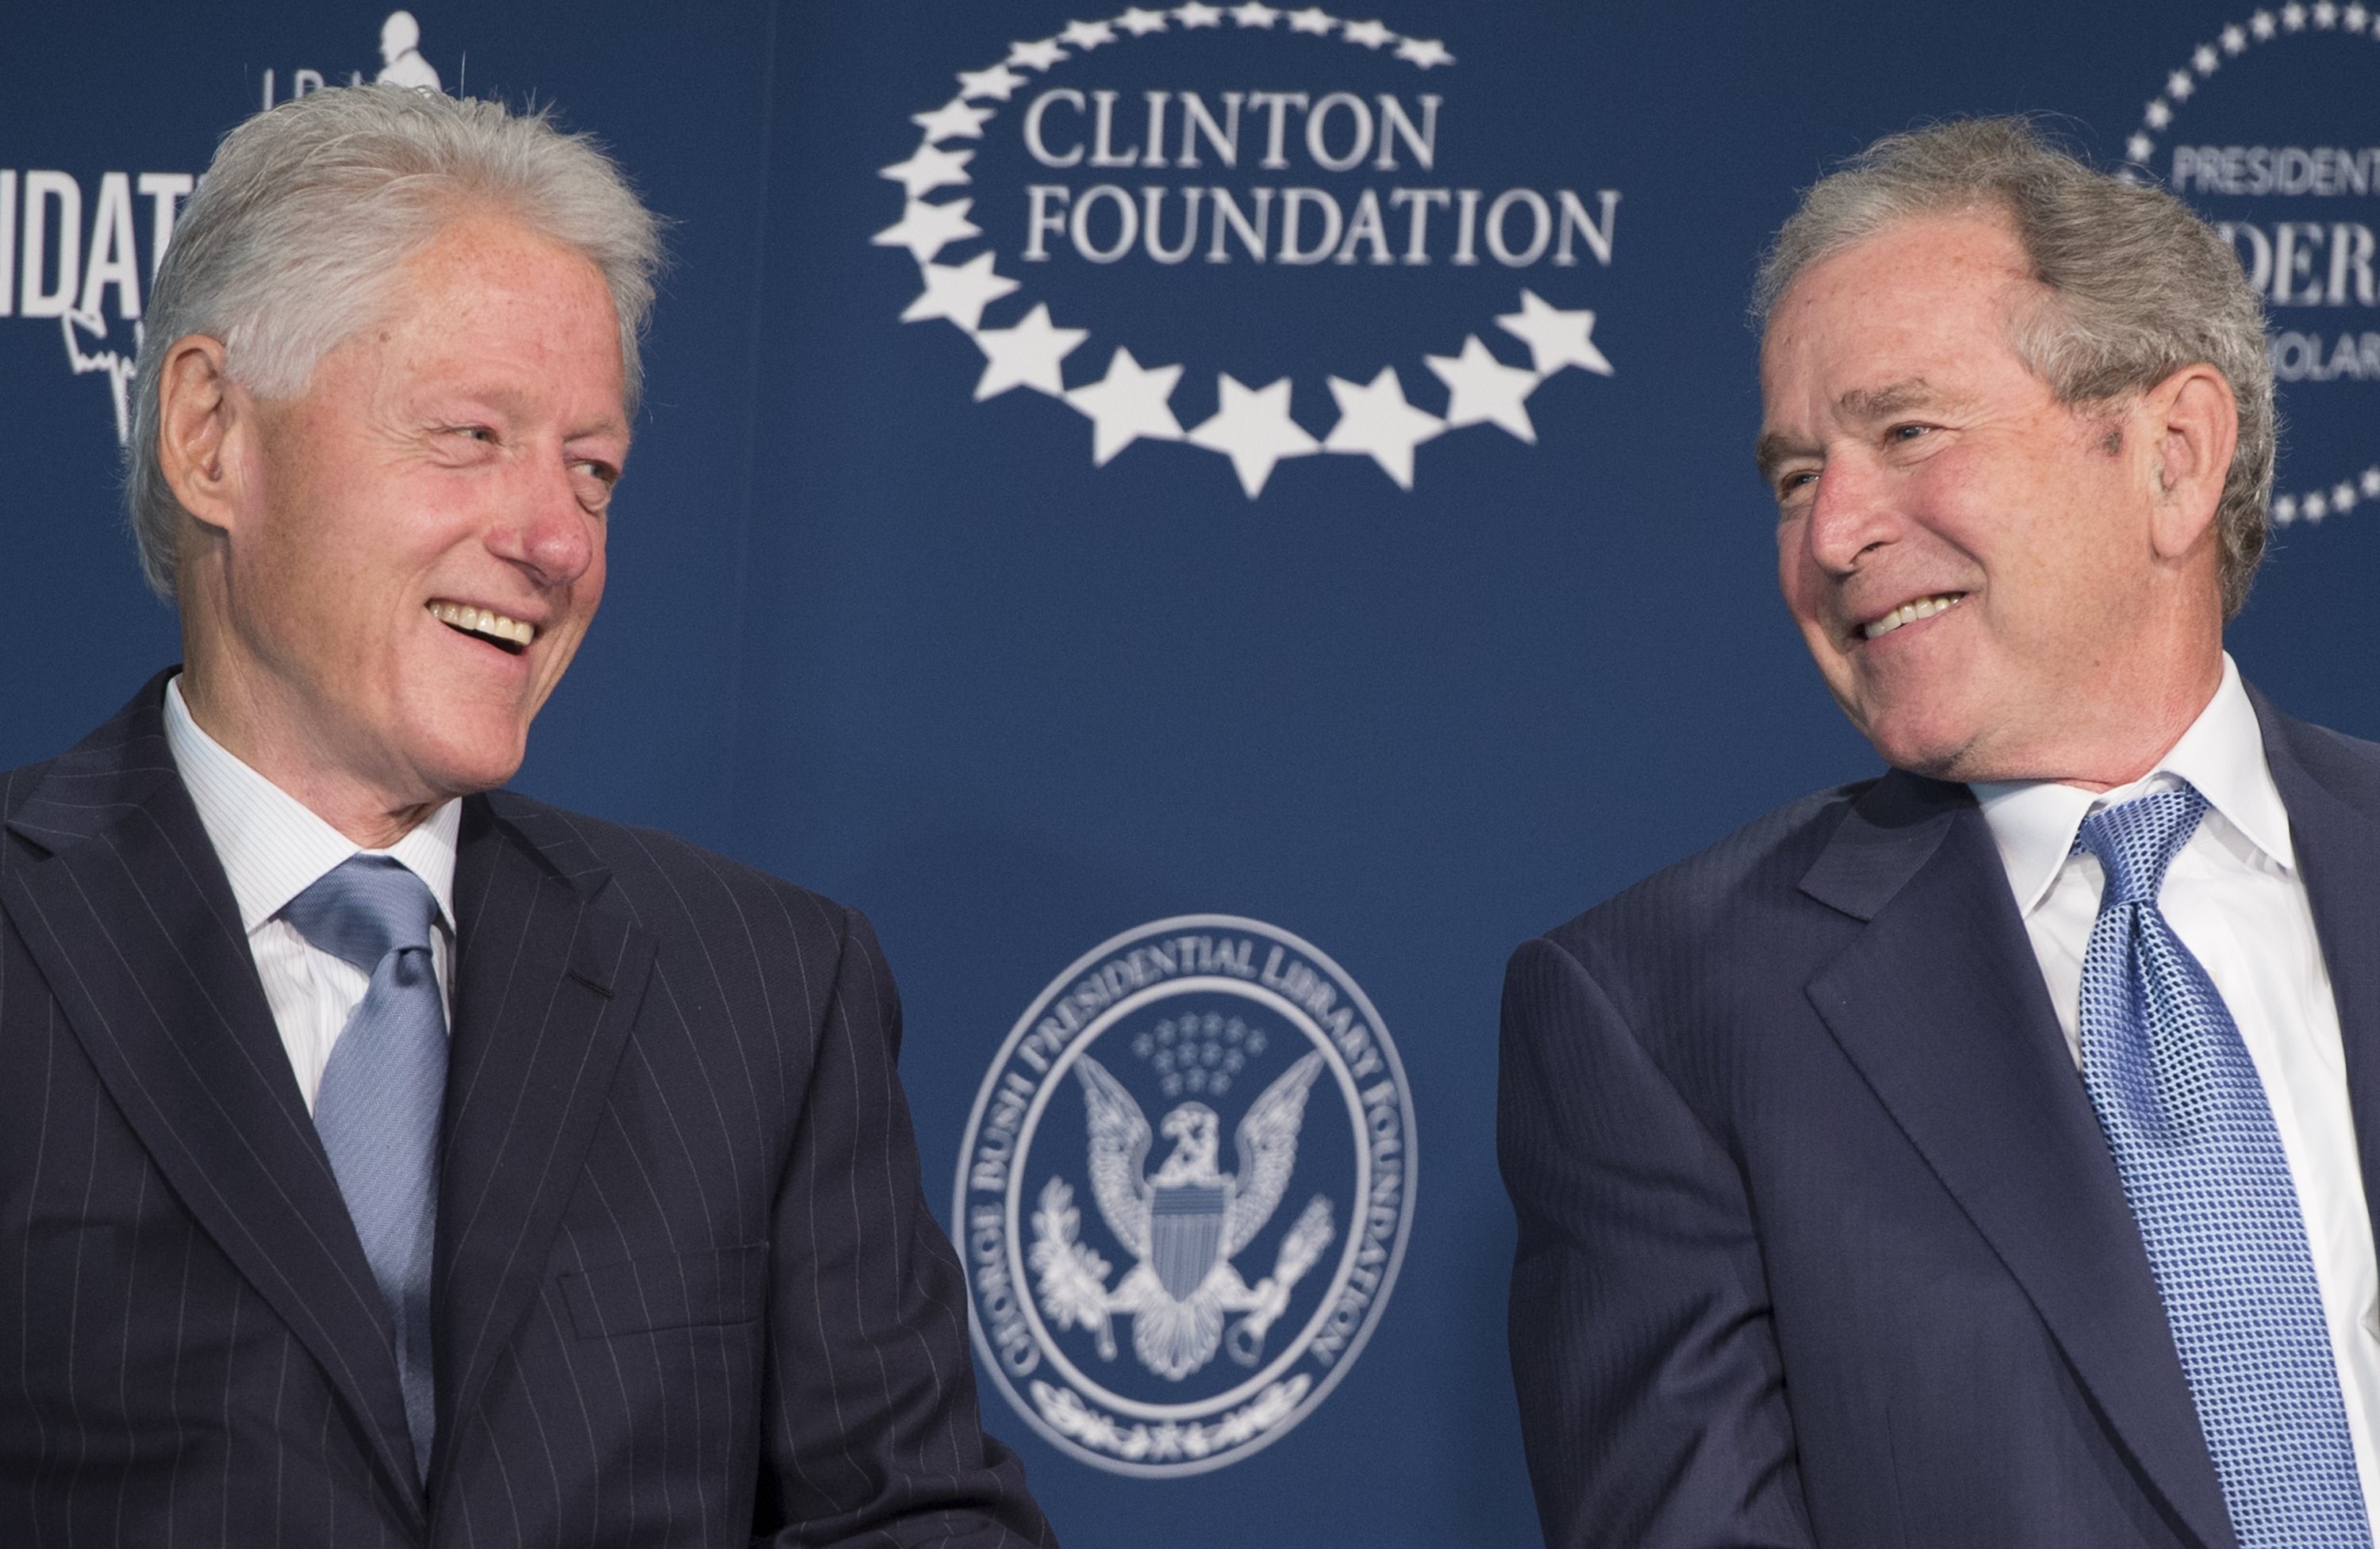 Former President Bill Clinton and former President George W. Bush speak during the launch of the Presidential Leadership Scholars Program at the Newseum in Washington on Sept. 8, 2014.